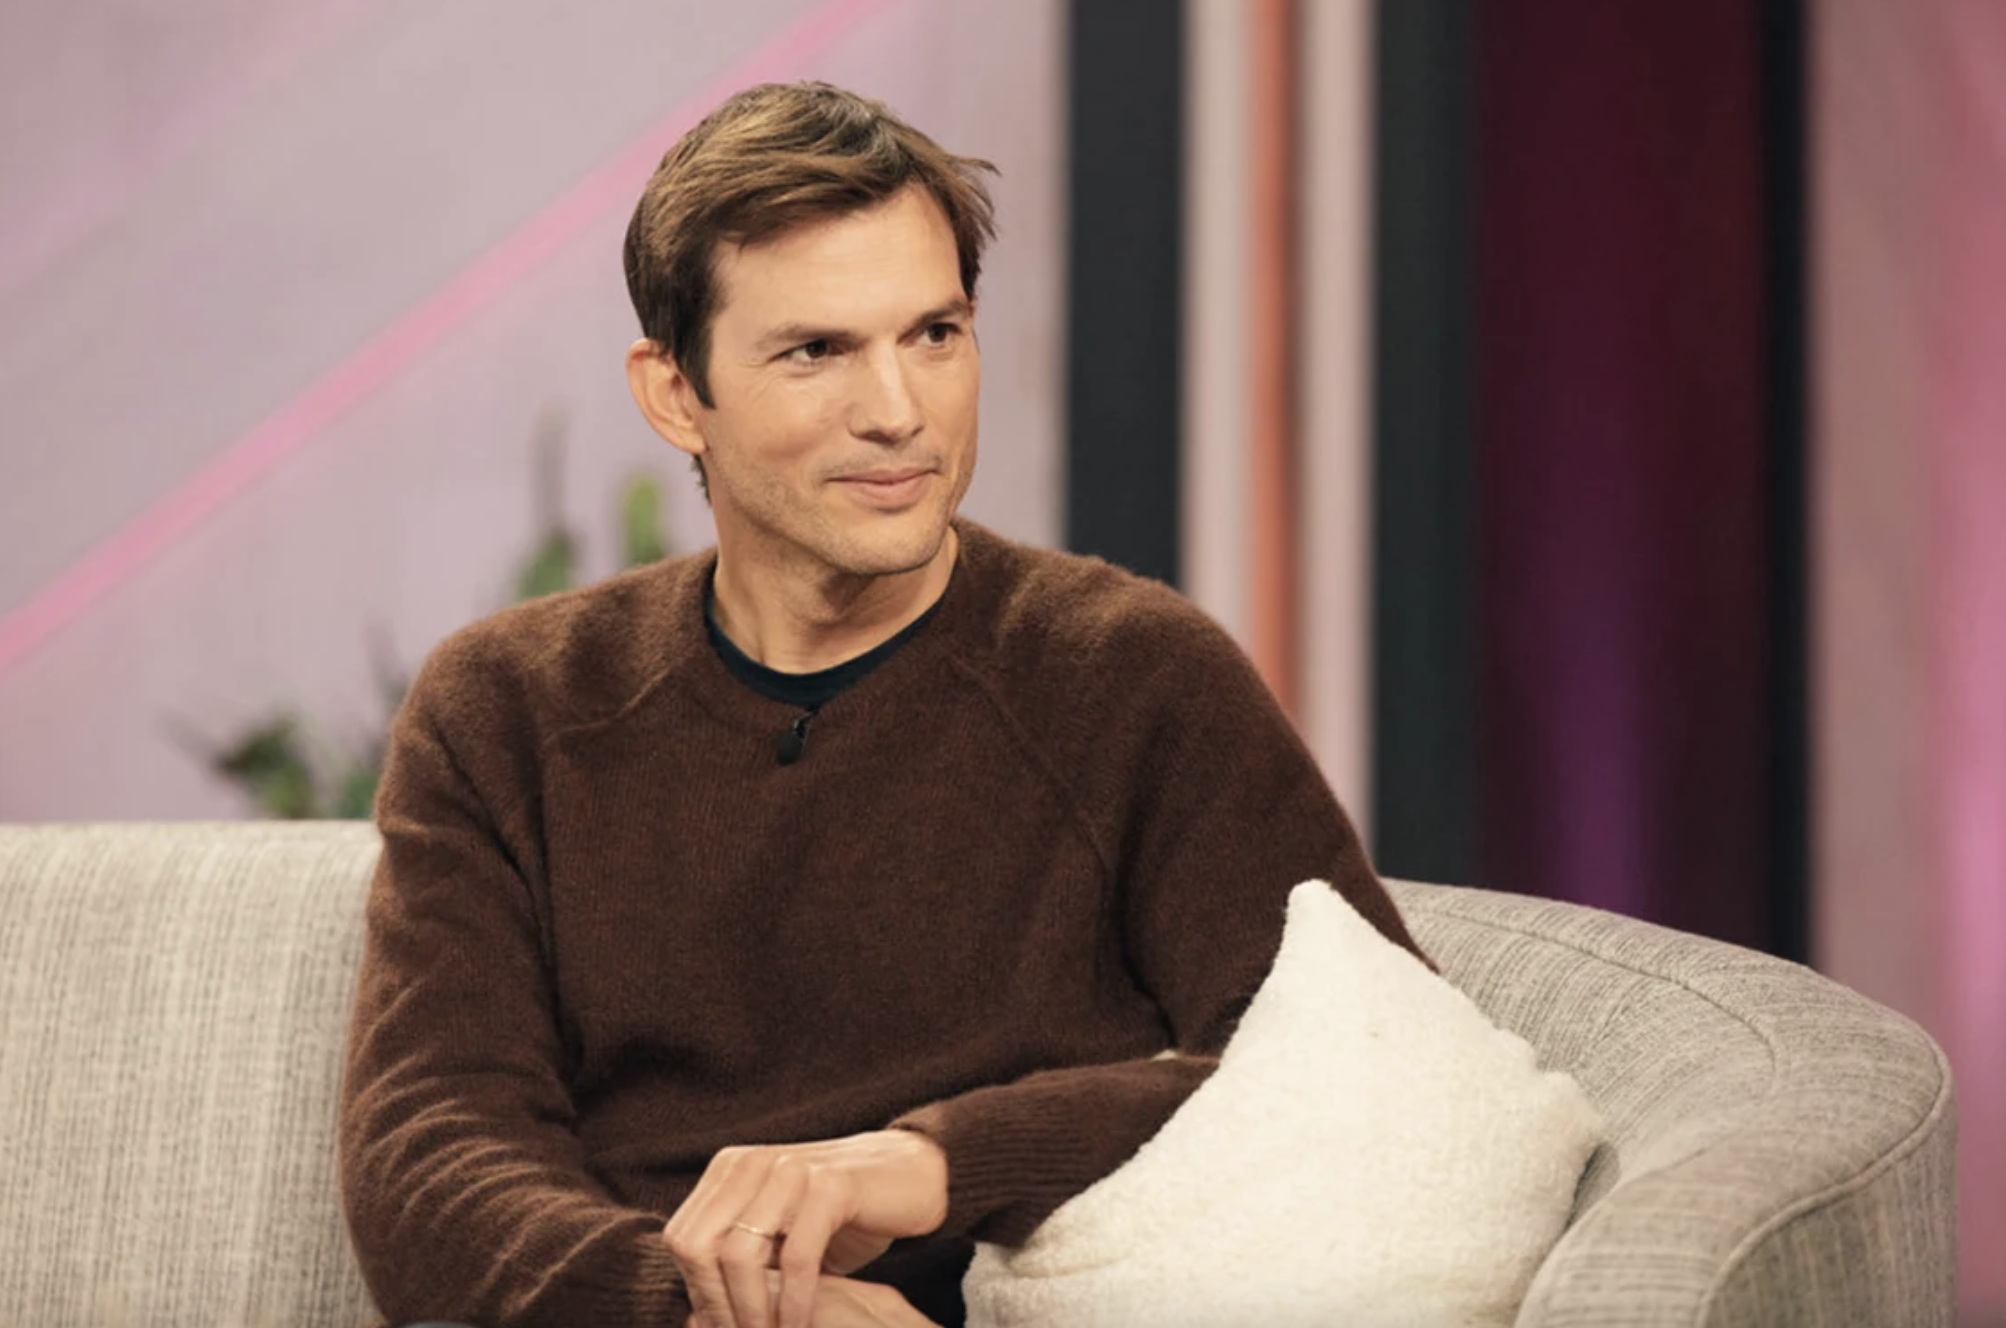 Ashton Kutcher Loves Putting This Unexpected Drink in His Coffee